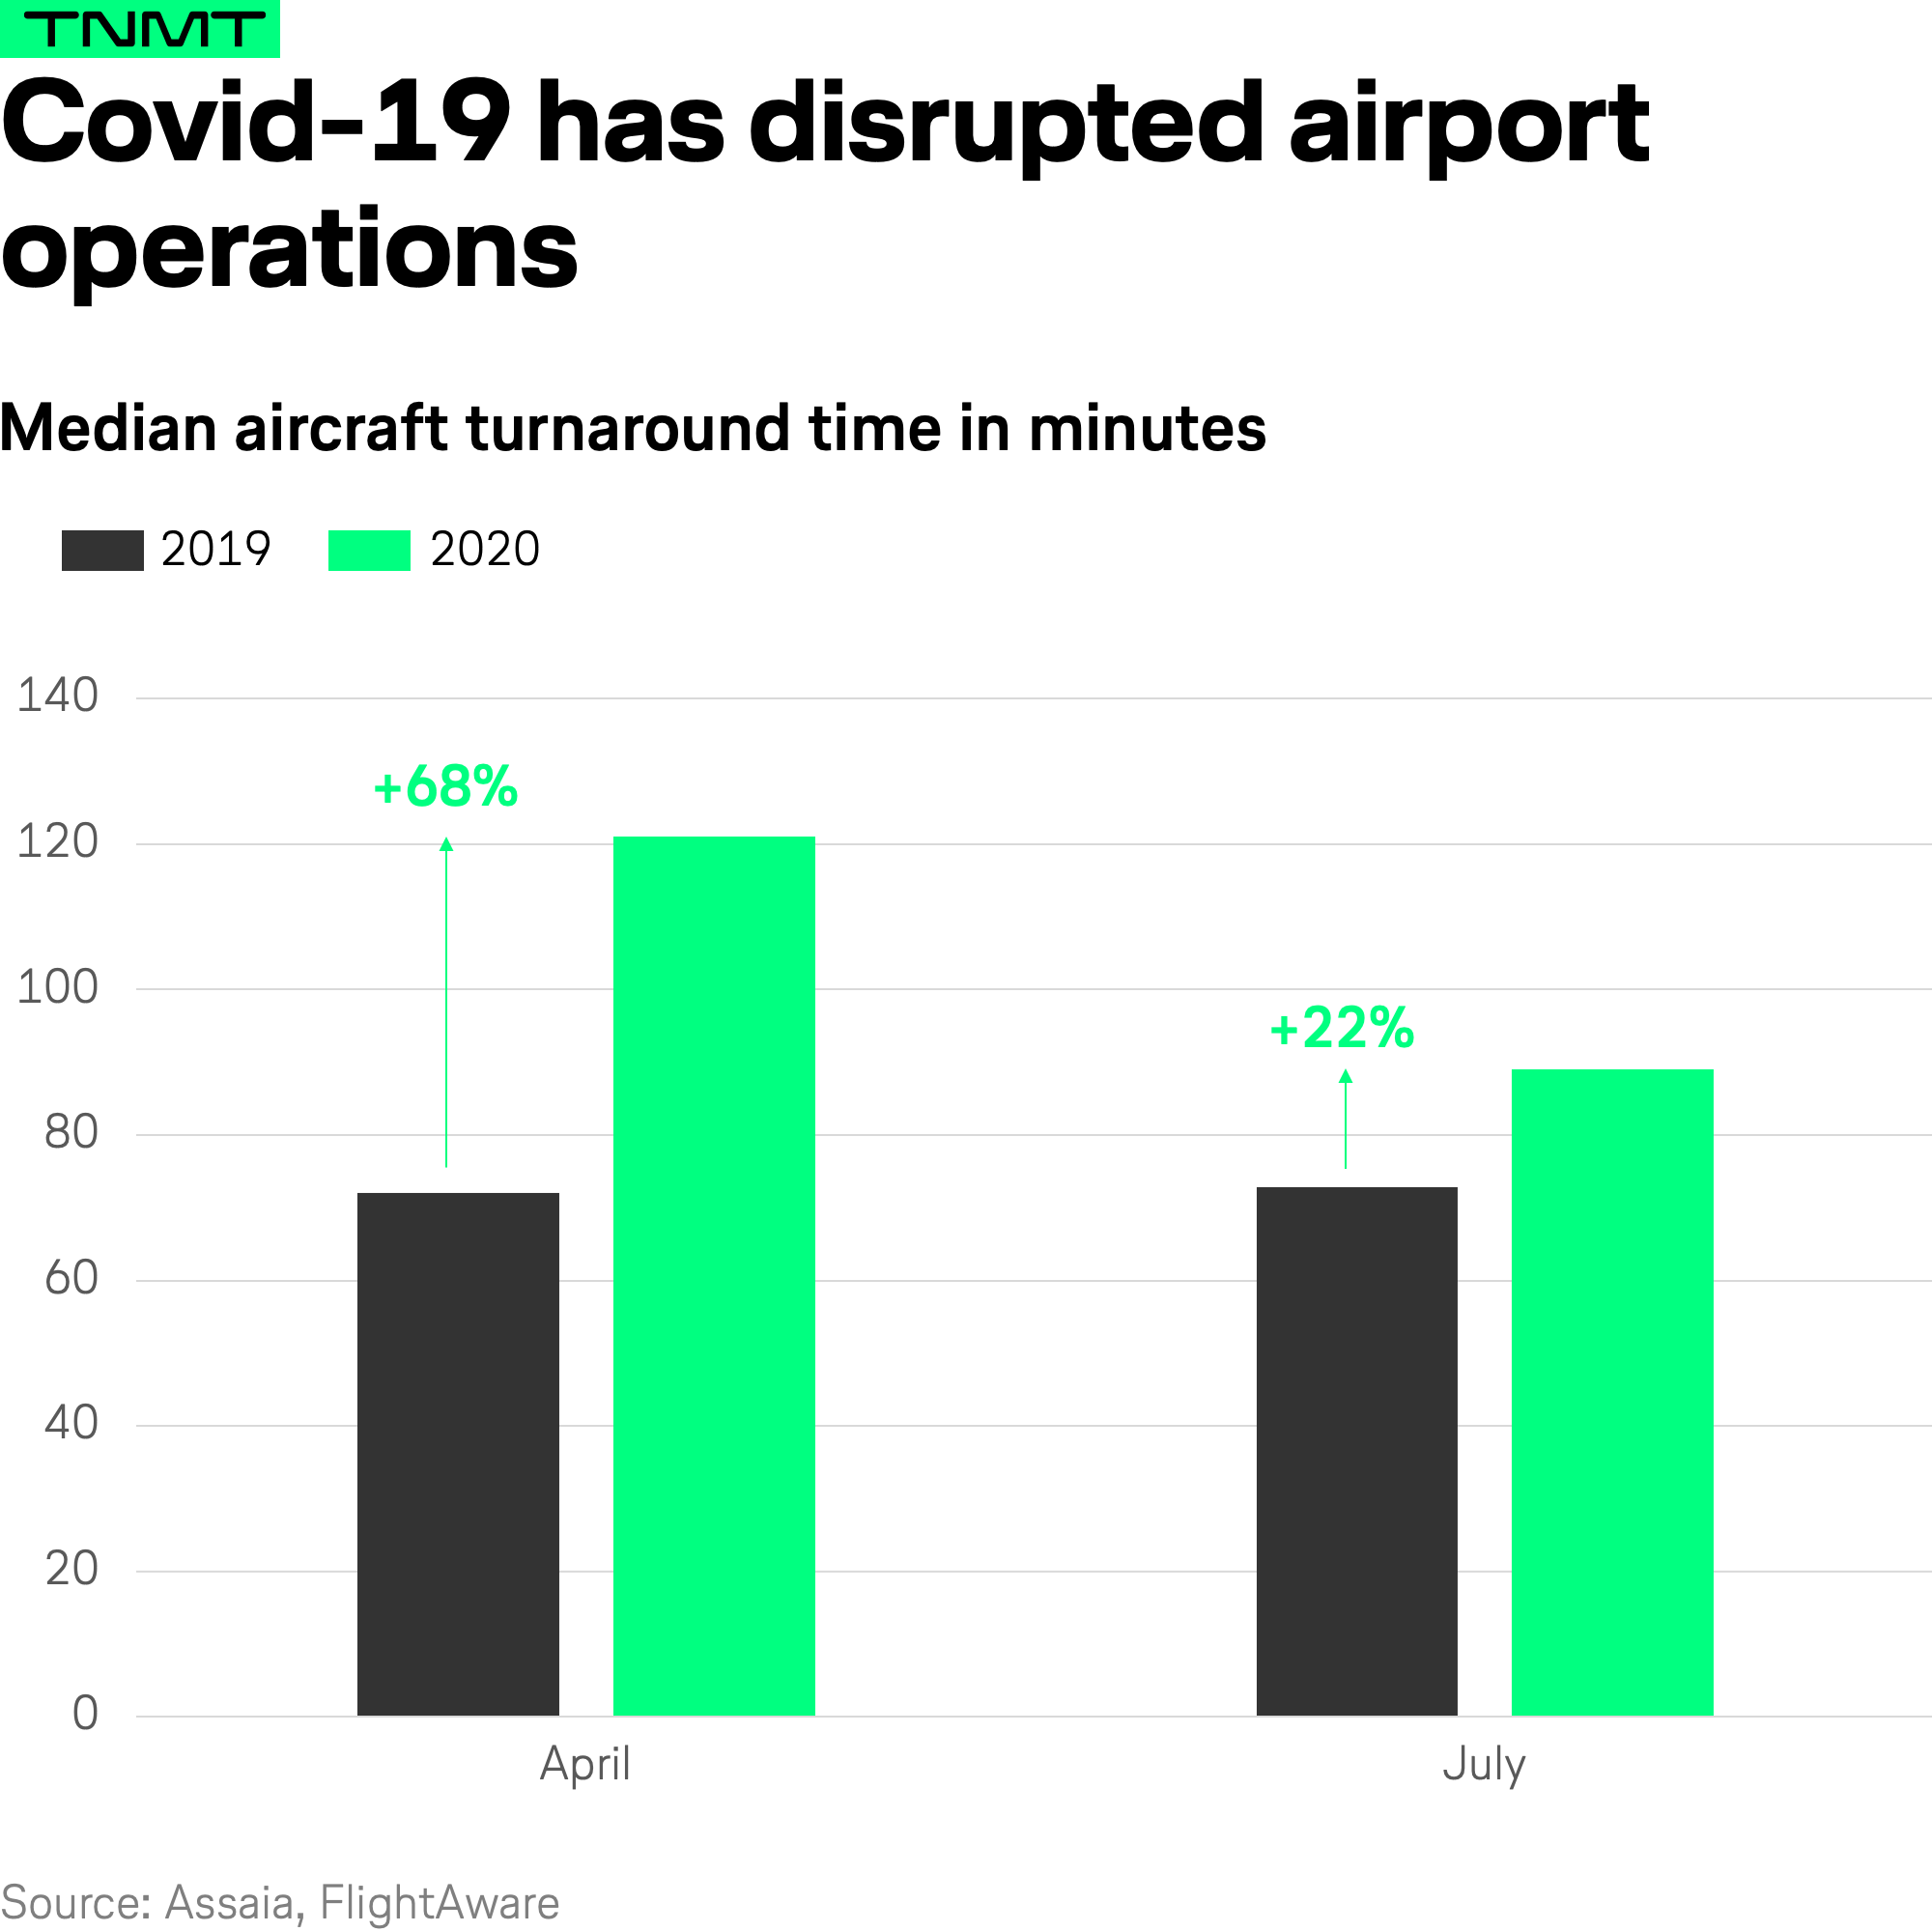 The unexpected airport capacity crunch - TNMT